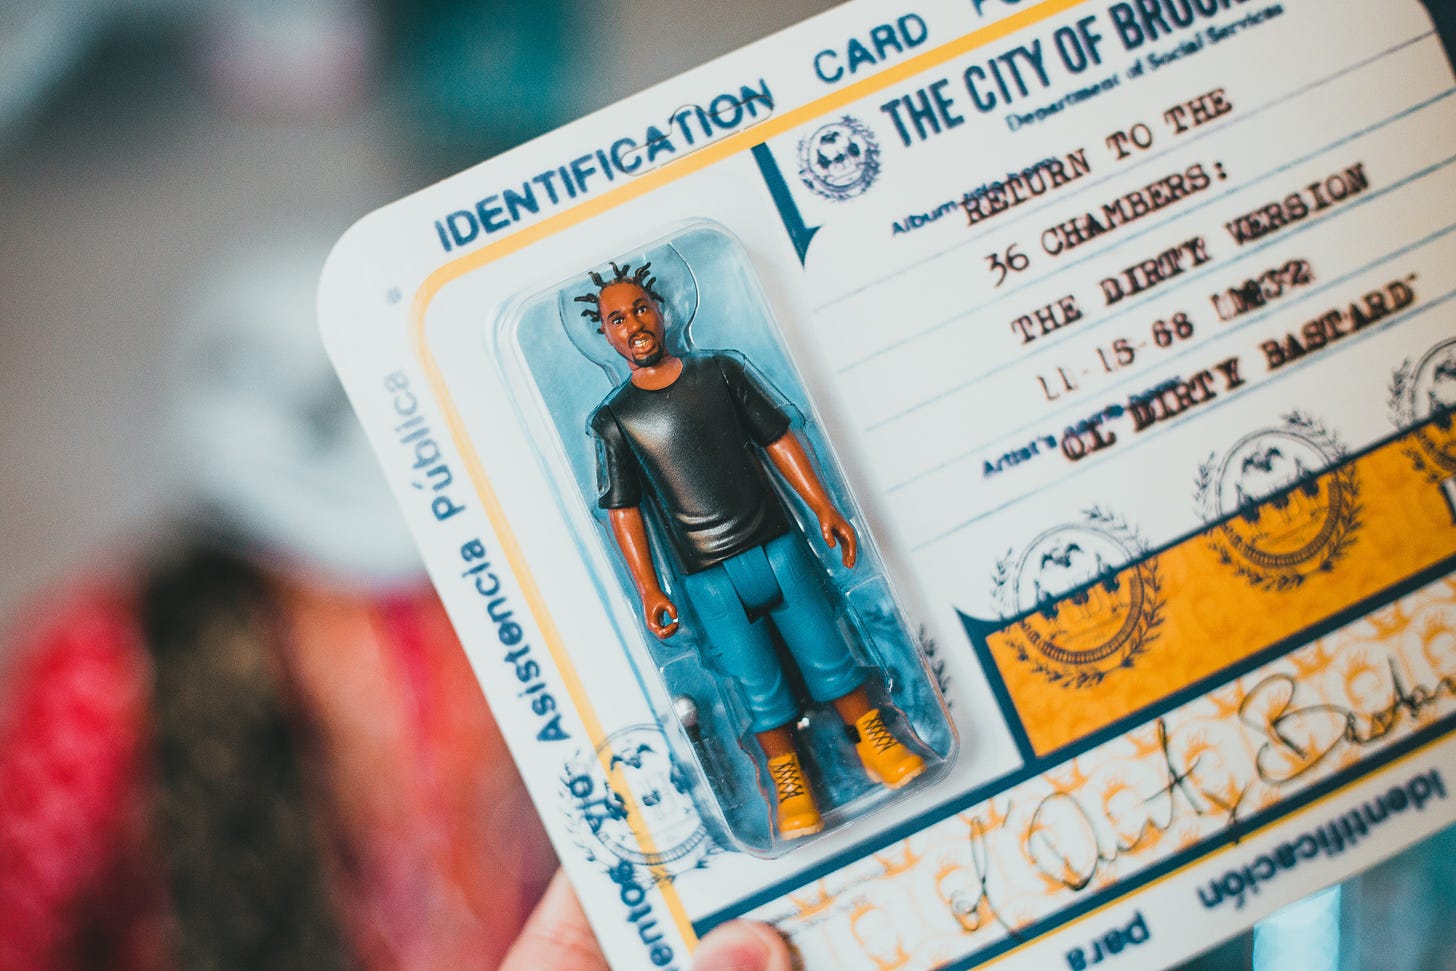 Image of identification card for ol dirty bastard. 